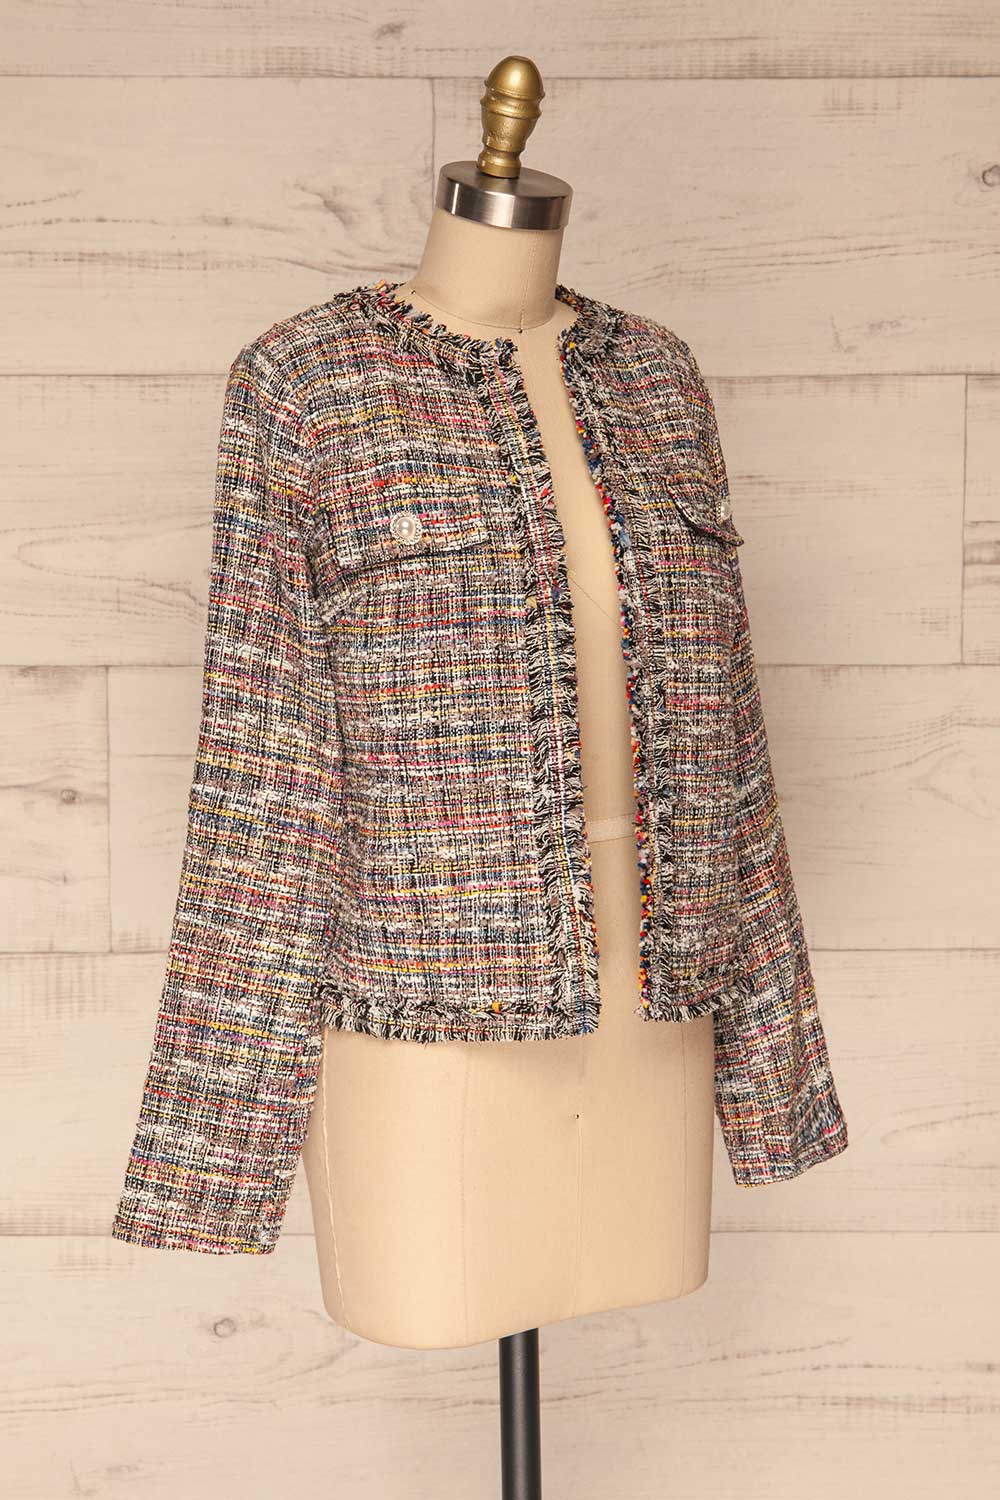 Chatel Colorful Tweed Jacket with Pearl Buttons | La Petite Garçonne side view 